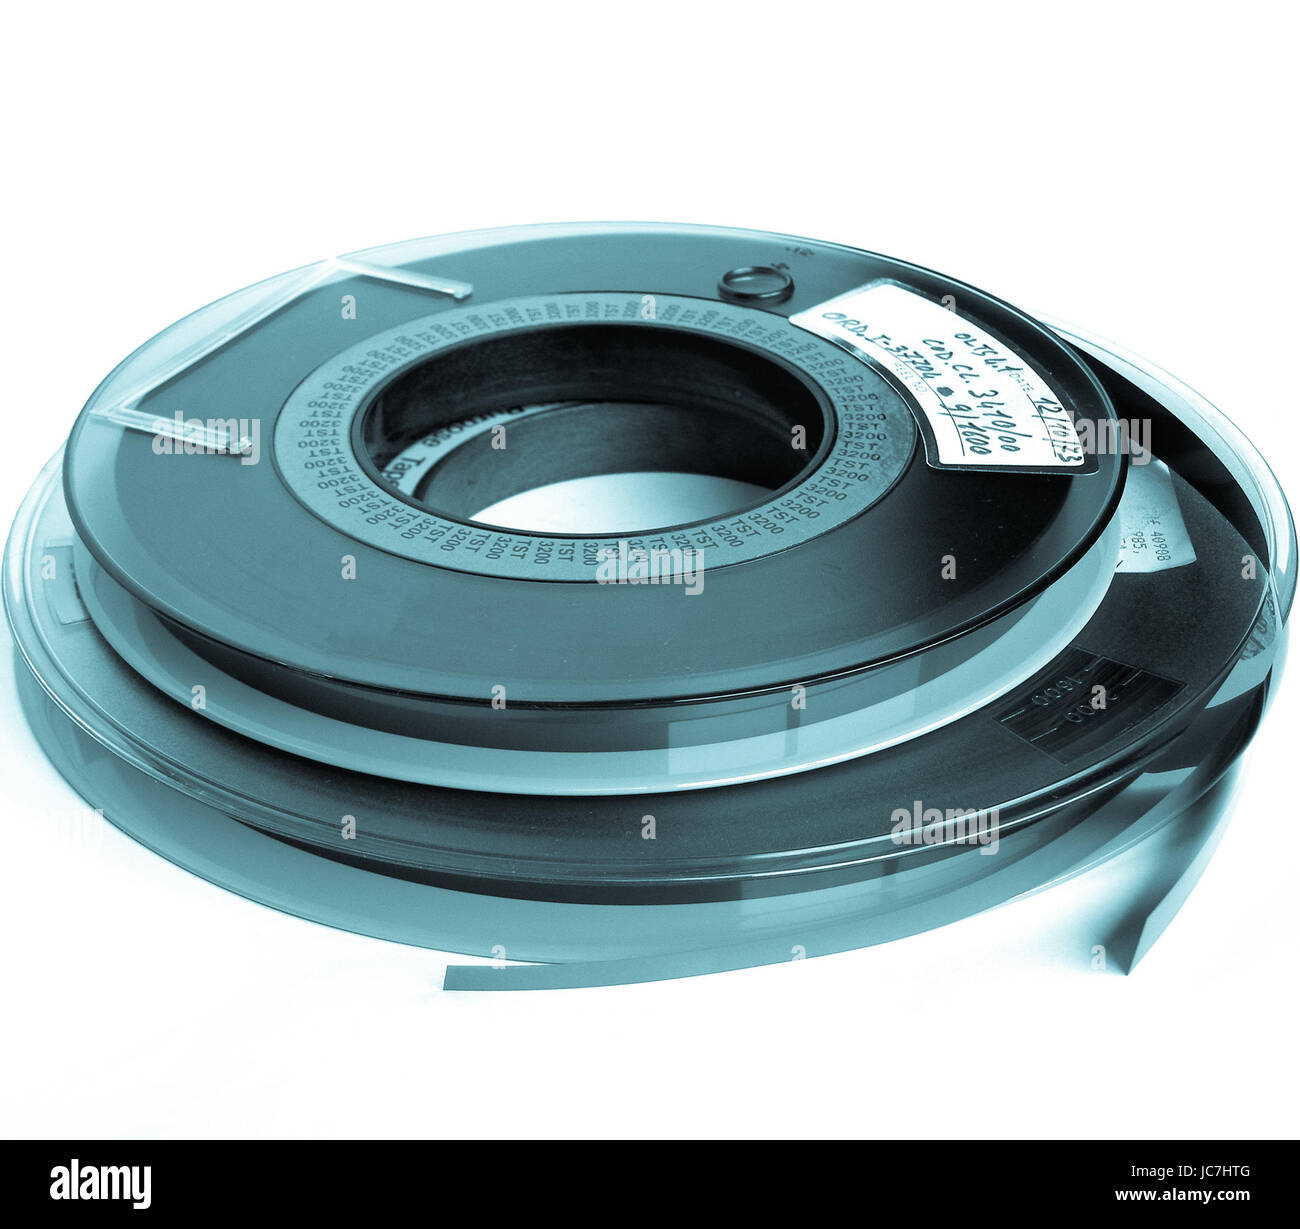 Magnetic tape reel for computer data storage - cool cyanotype Stock Photo -  Alamy